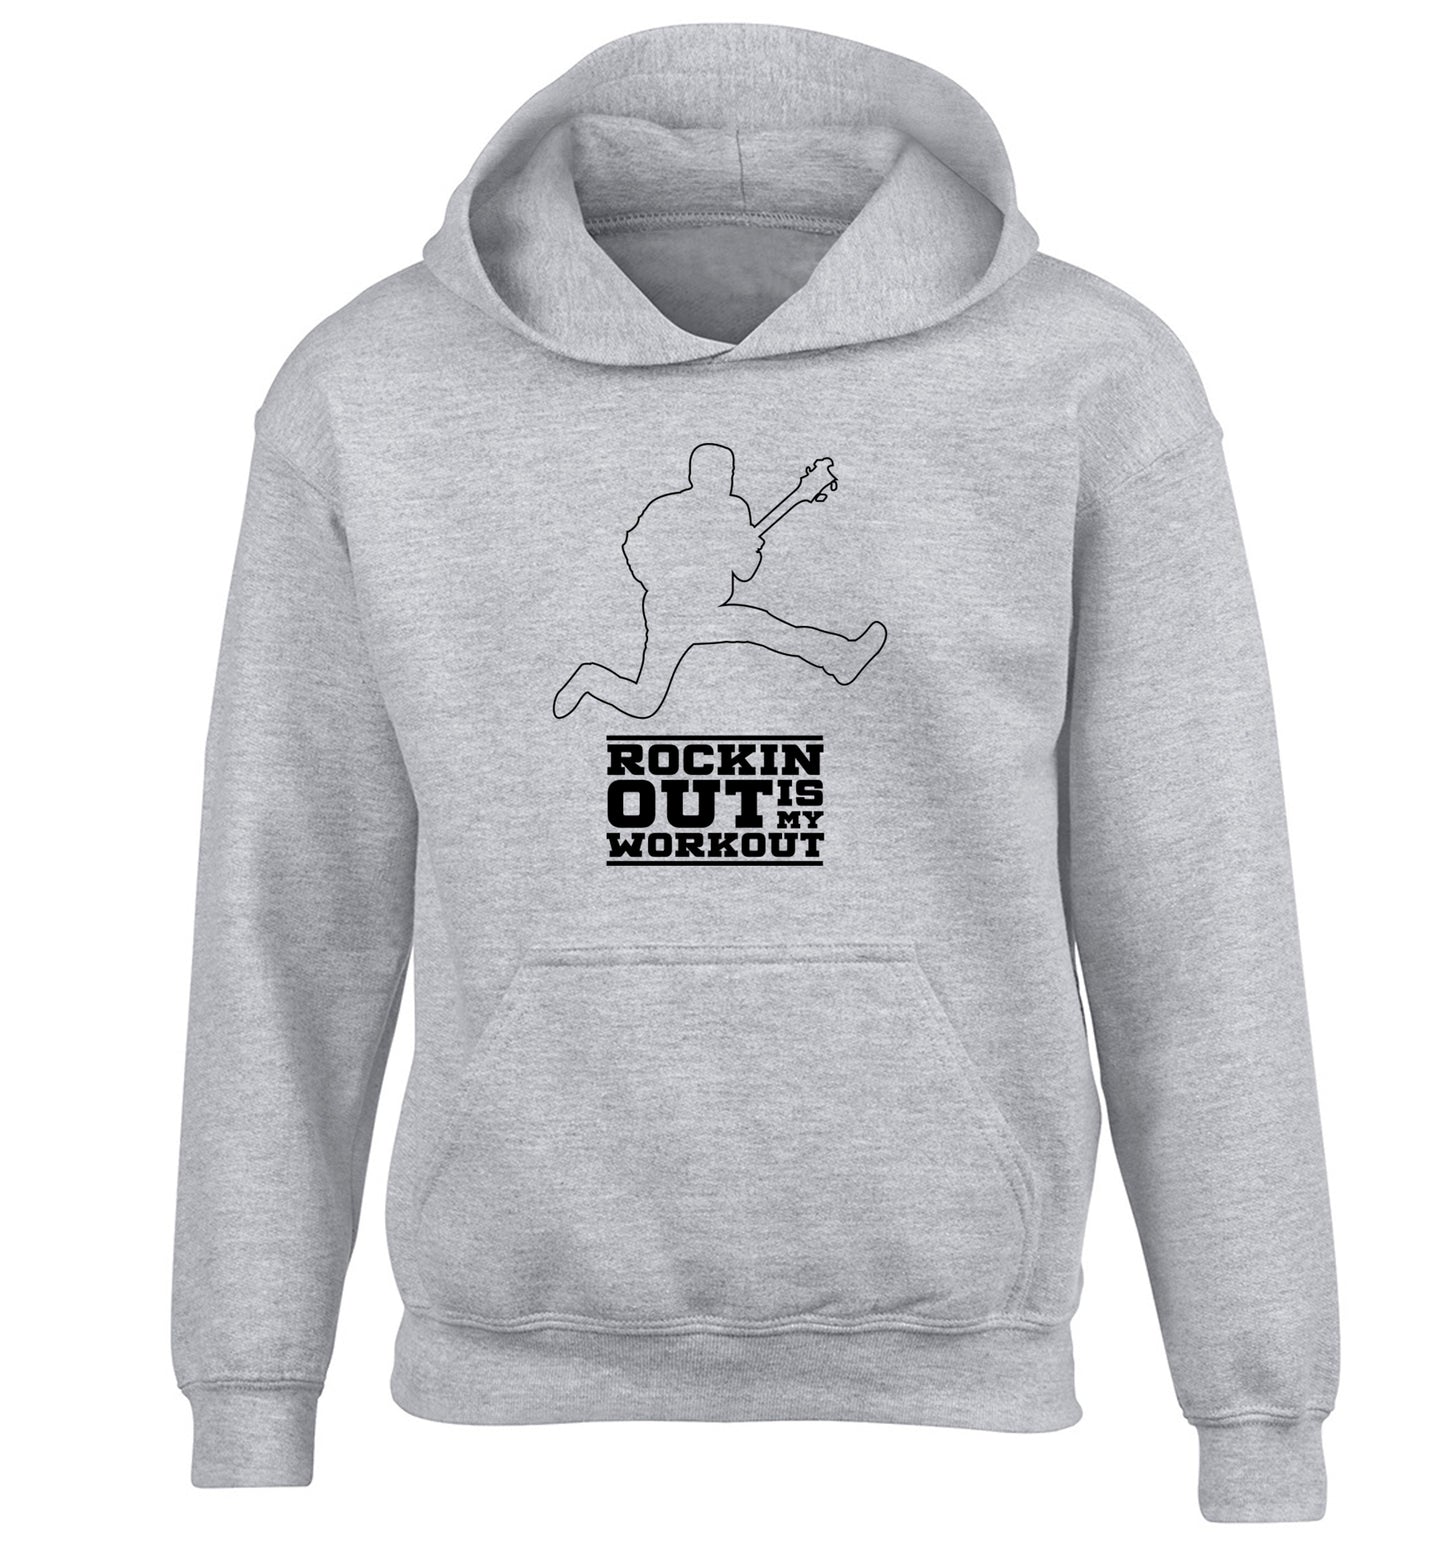 Rockin out is my workout 2 children's grey hoodie 12-13 Years